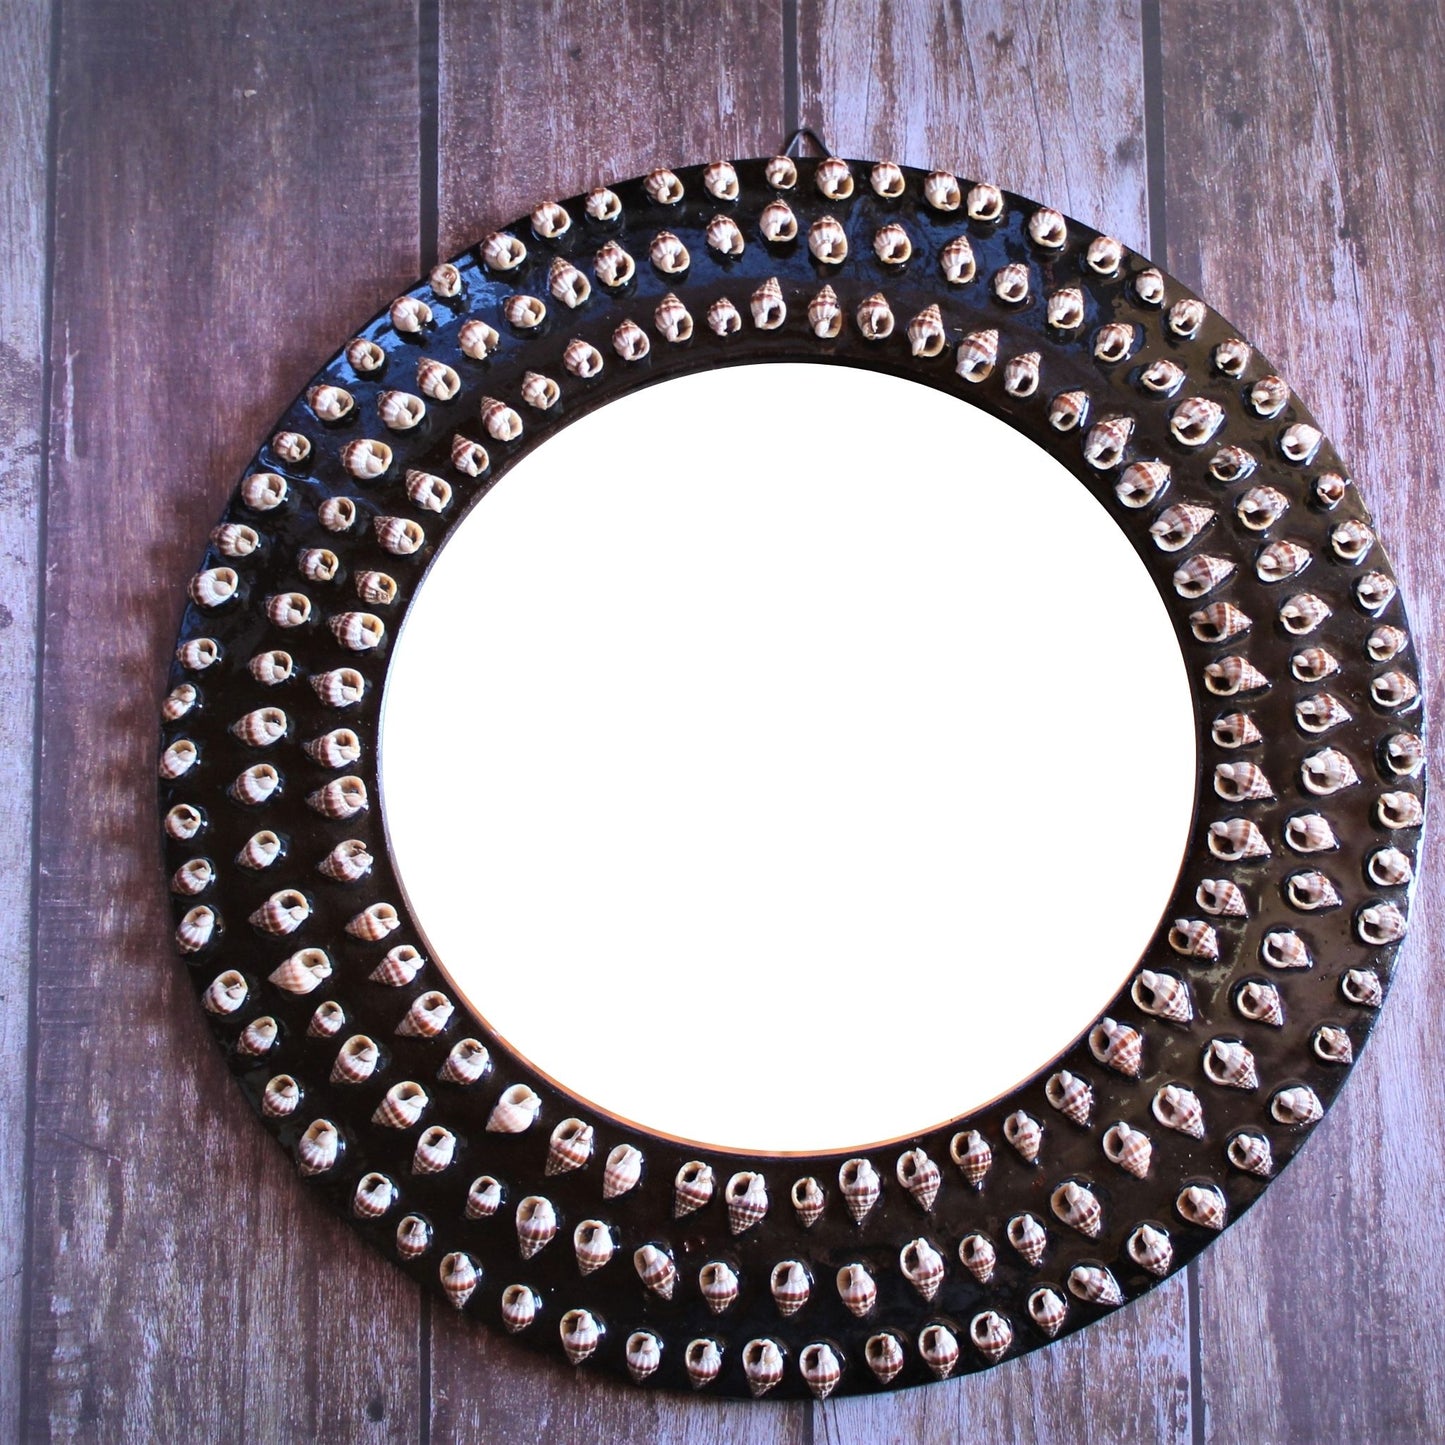 Handcrafted Mirror with Shell Design for Bathroom/Dressing Room